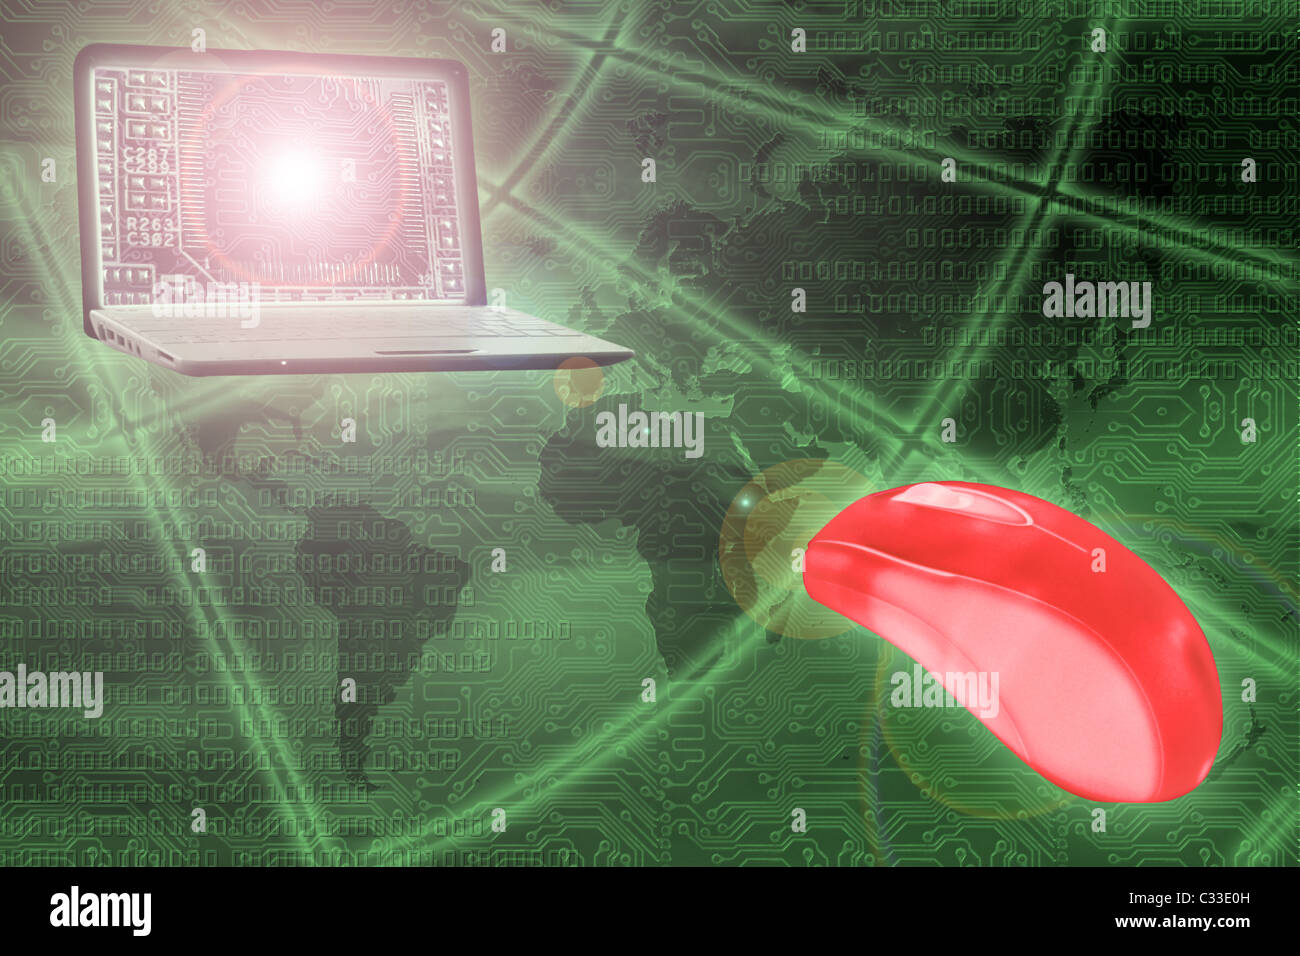 digital world concept: laptop and mouse over world map and circuit Stock Photo